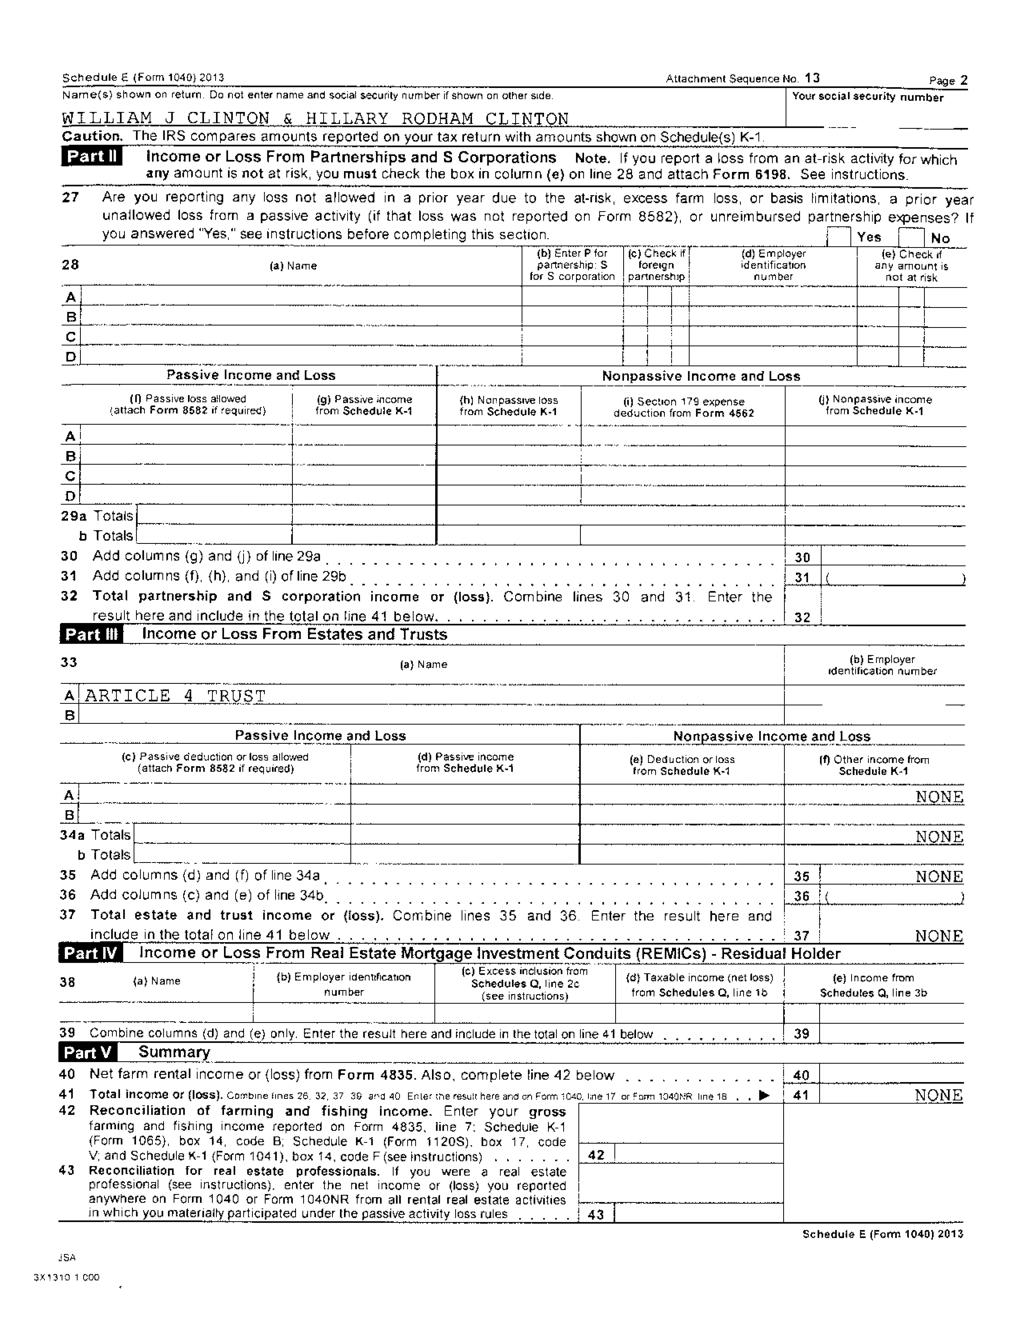 Schedule E (Form 1040) 2013 Attachment Sequence No. 13 Page 2 Name(s) shown on return. Do not enter name and social security number if shown on other side.